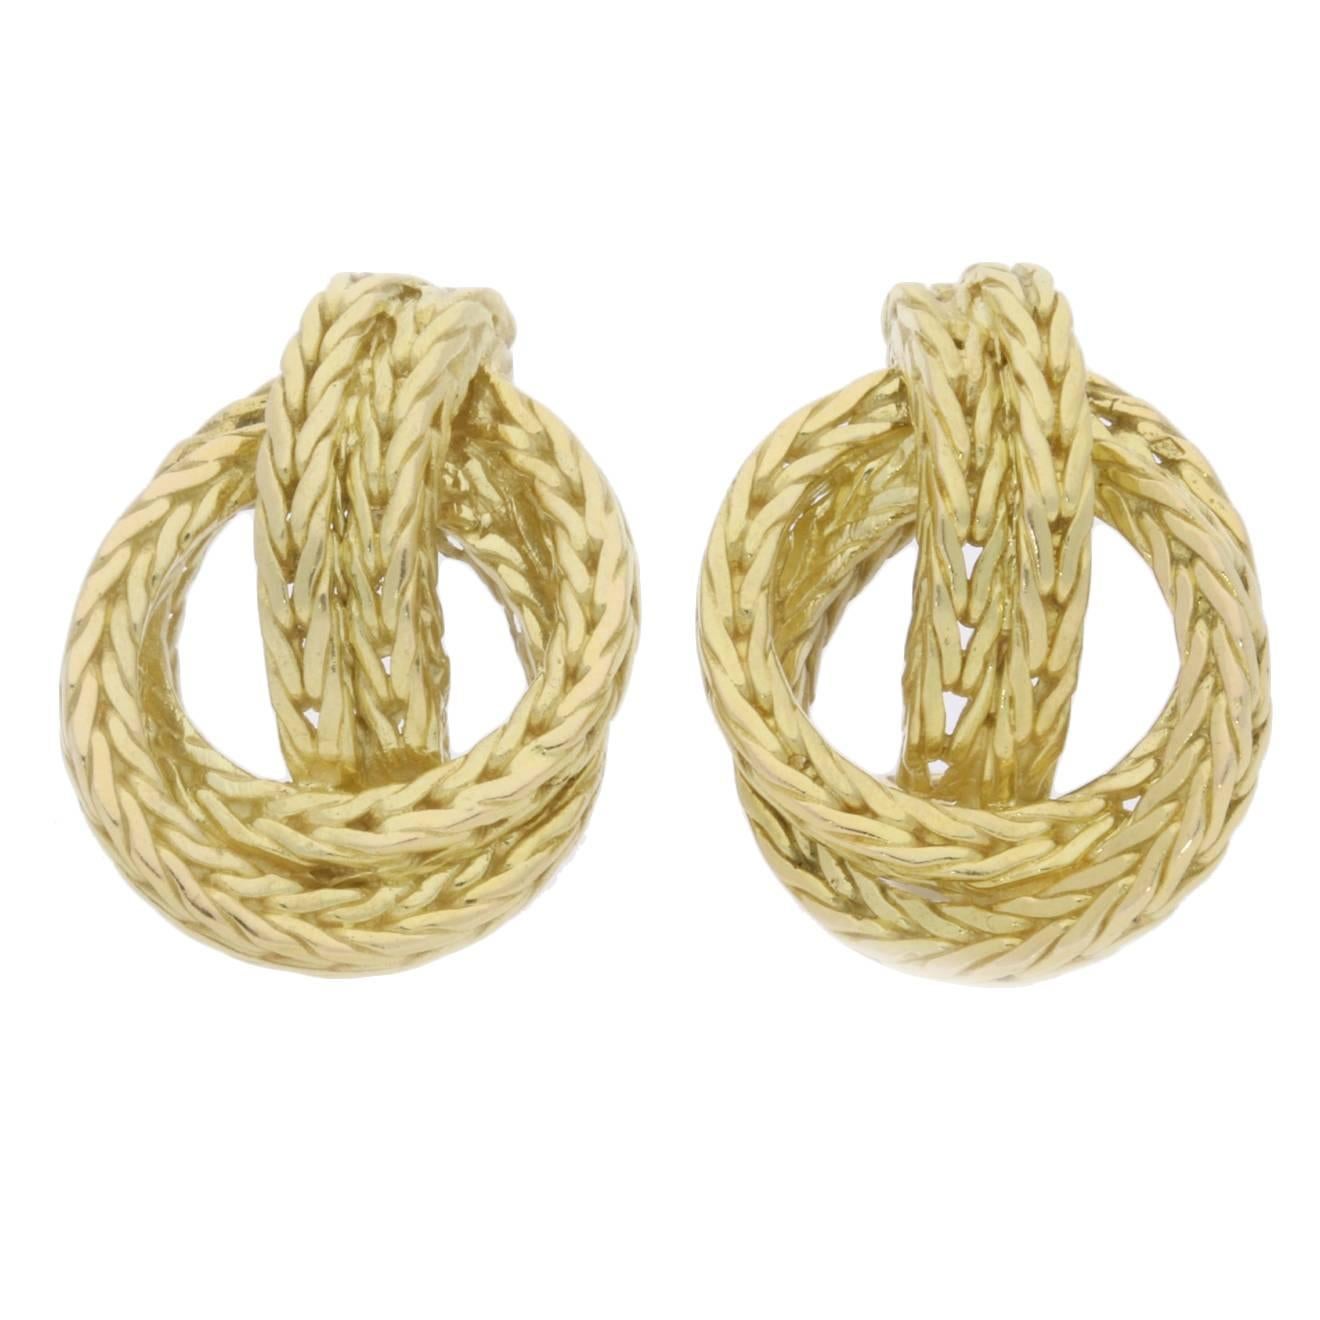 Gold 'NAUTICAL LINK' Knot Earrings By Hermes c.1970's